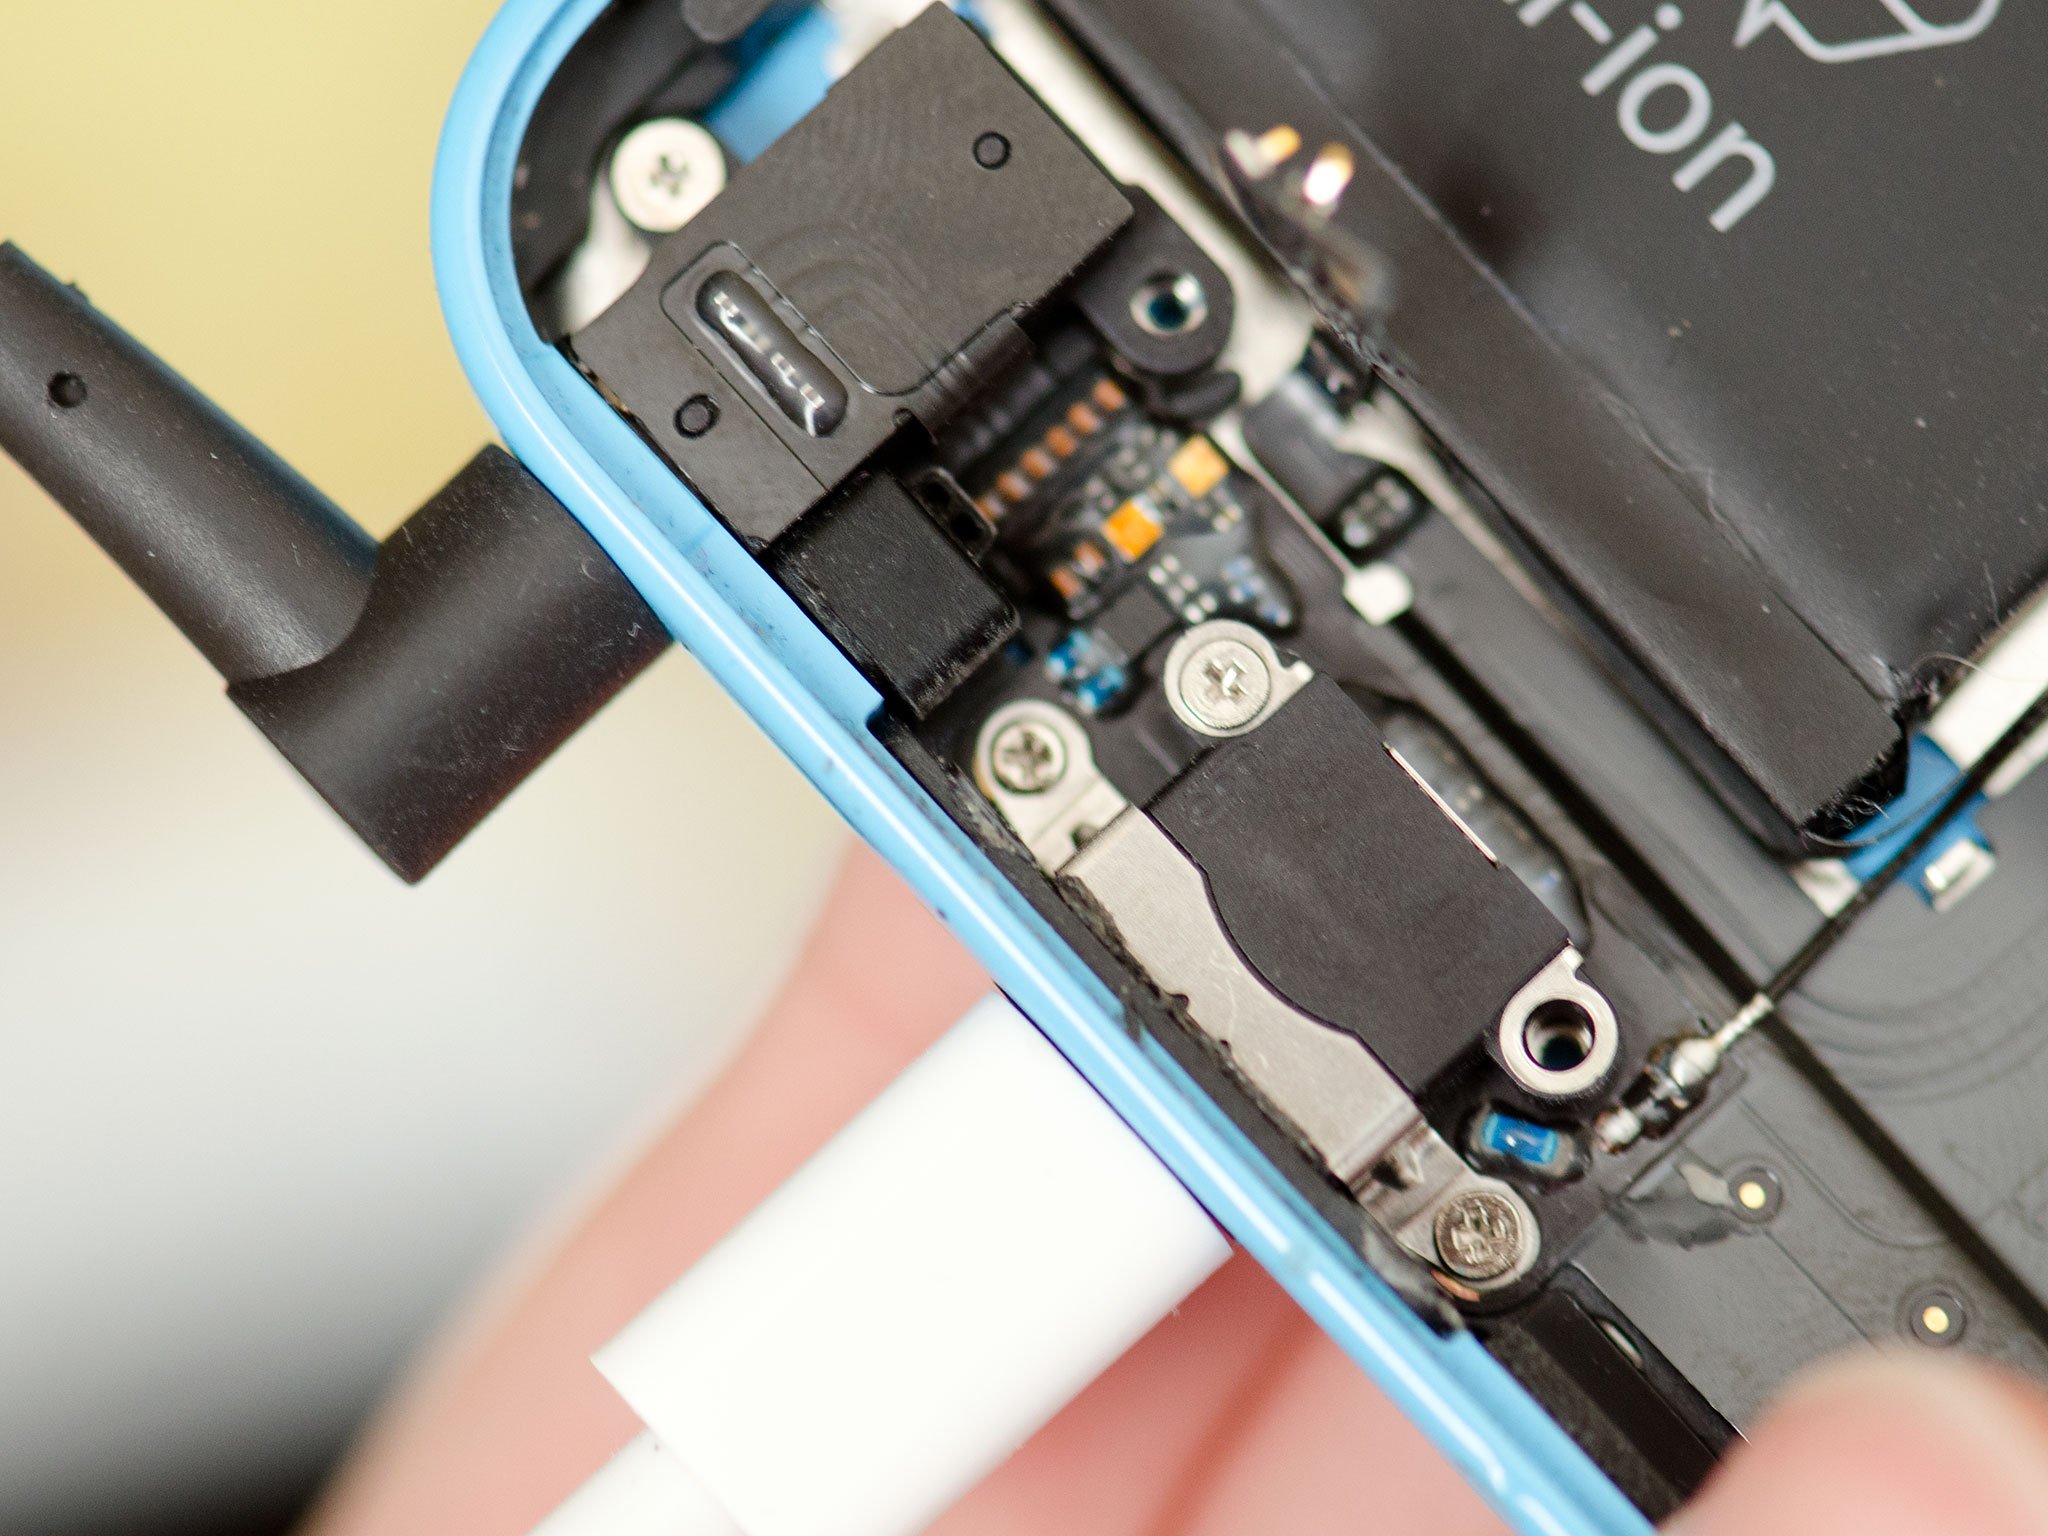 How to replace the dock connector in an iPhone 5c